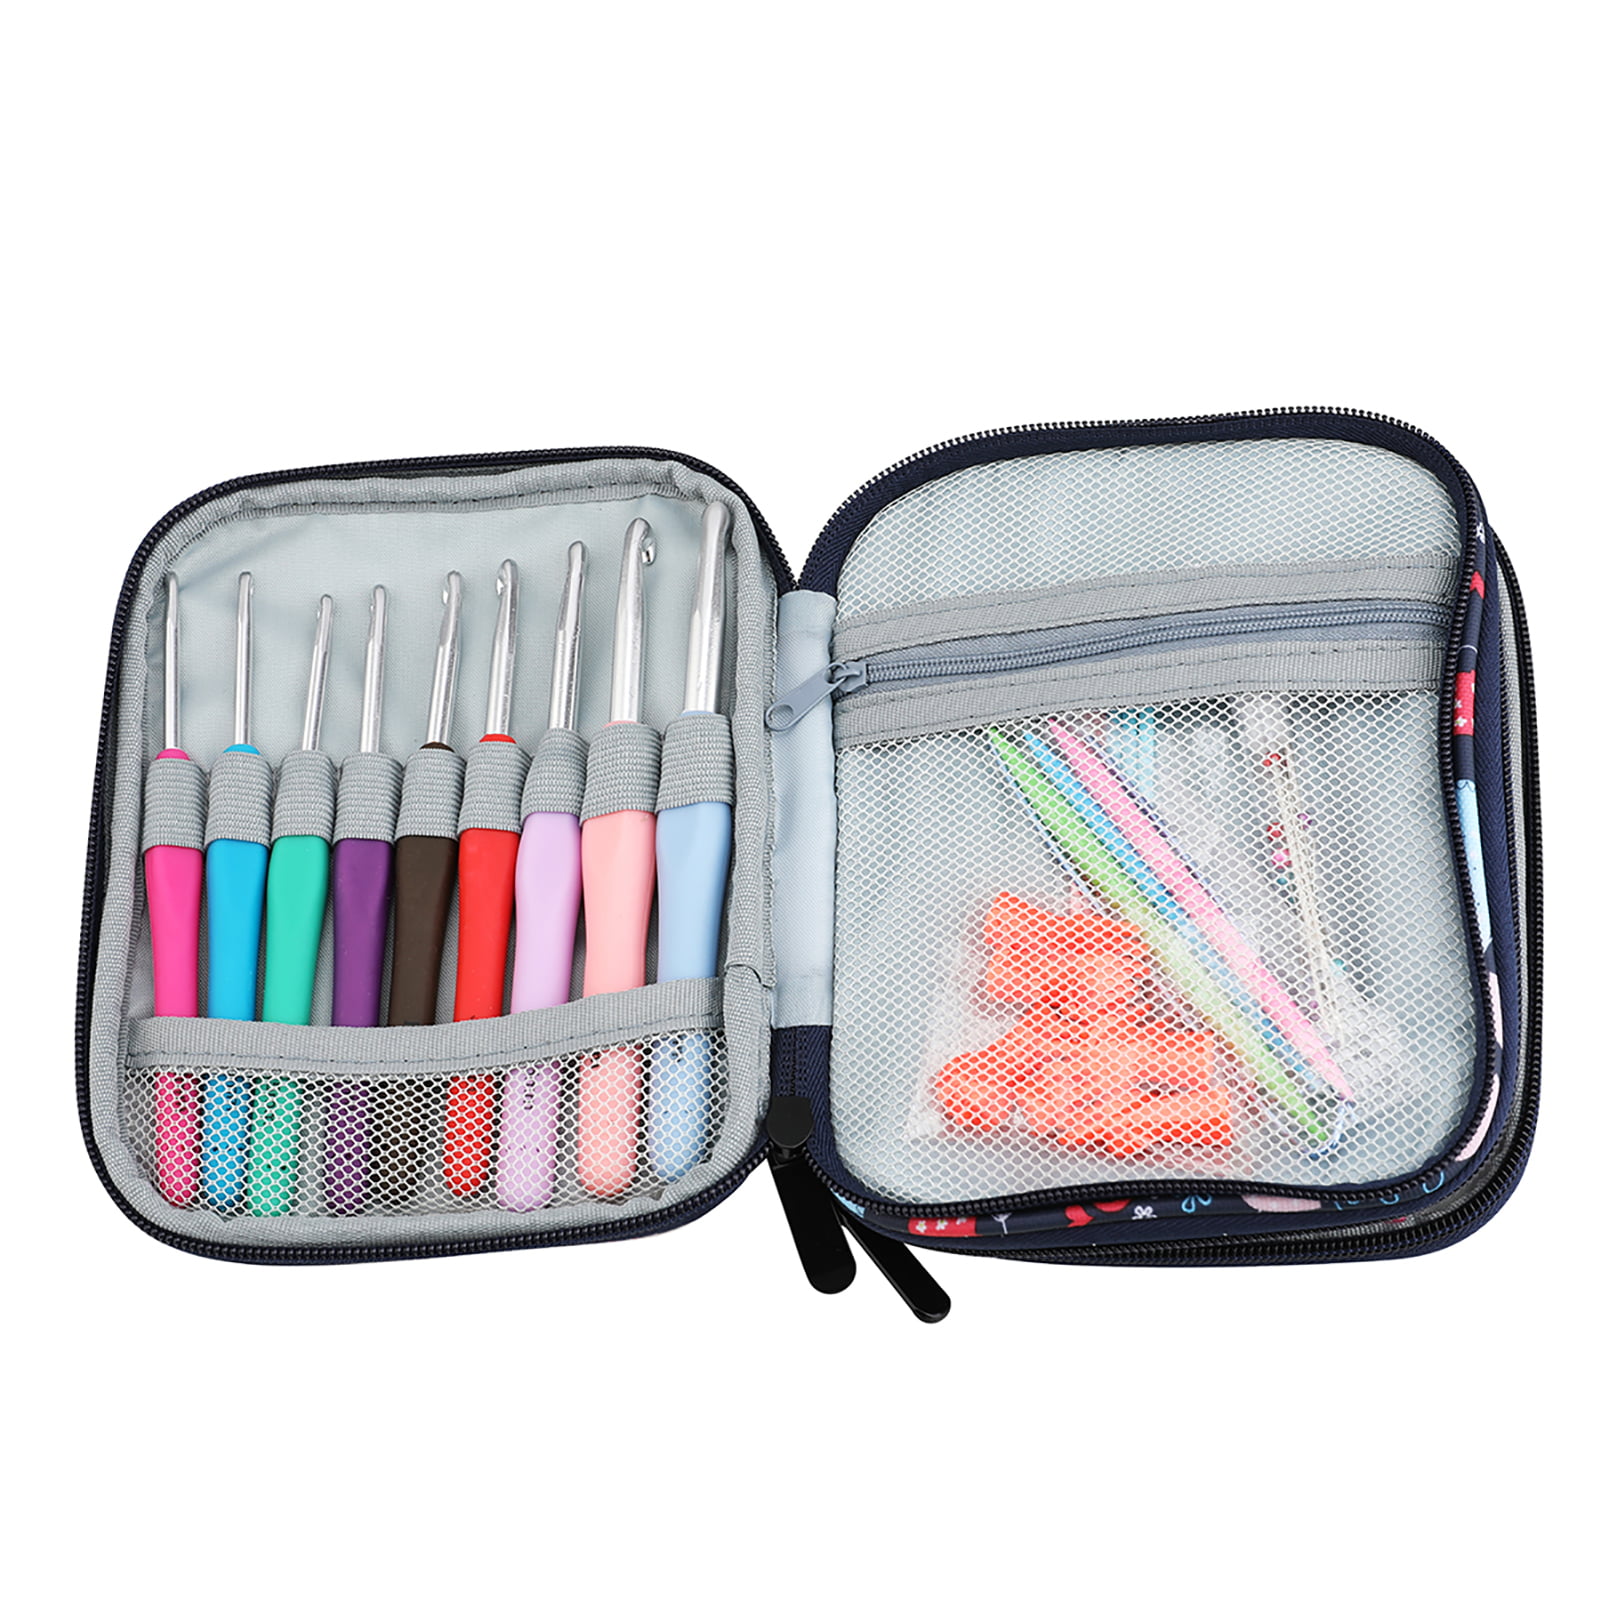 Aluminum Crochet Hook Set in Carry Case by Loops & Threads®